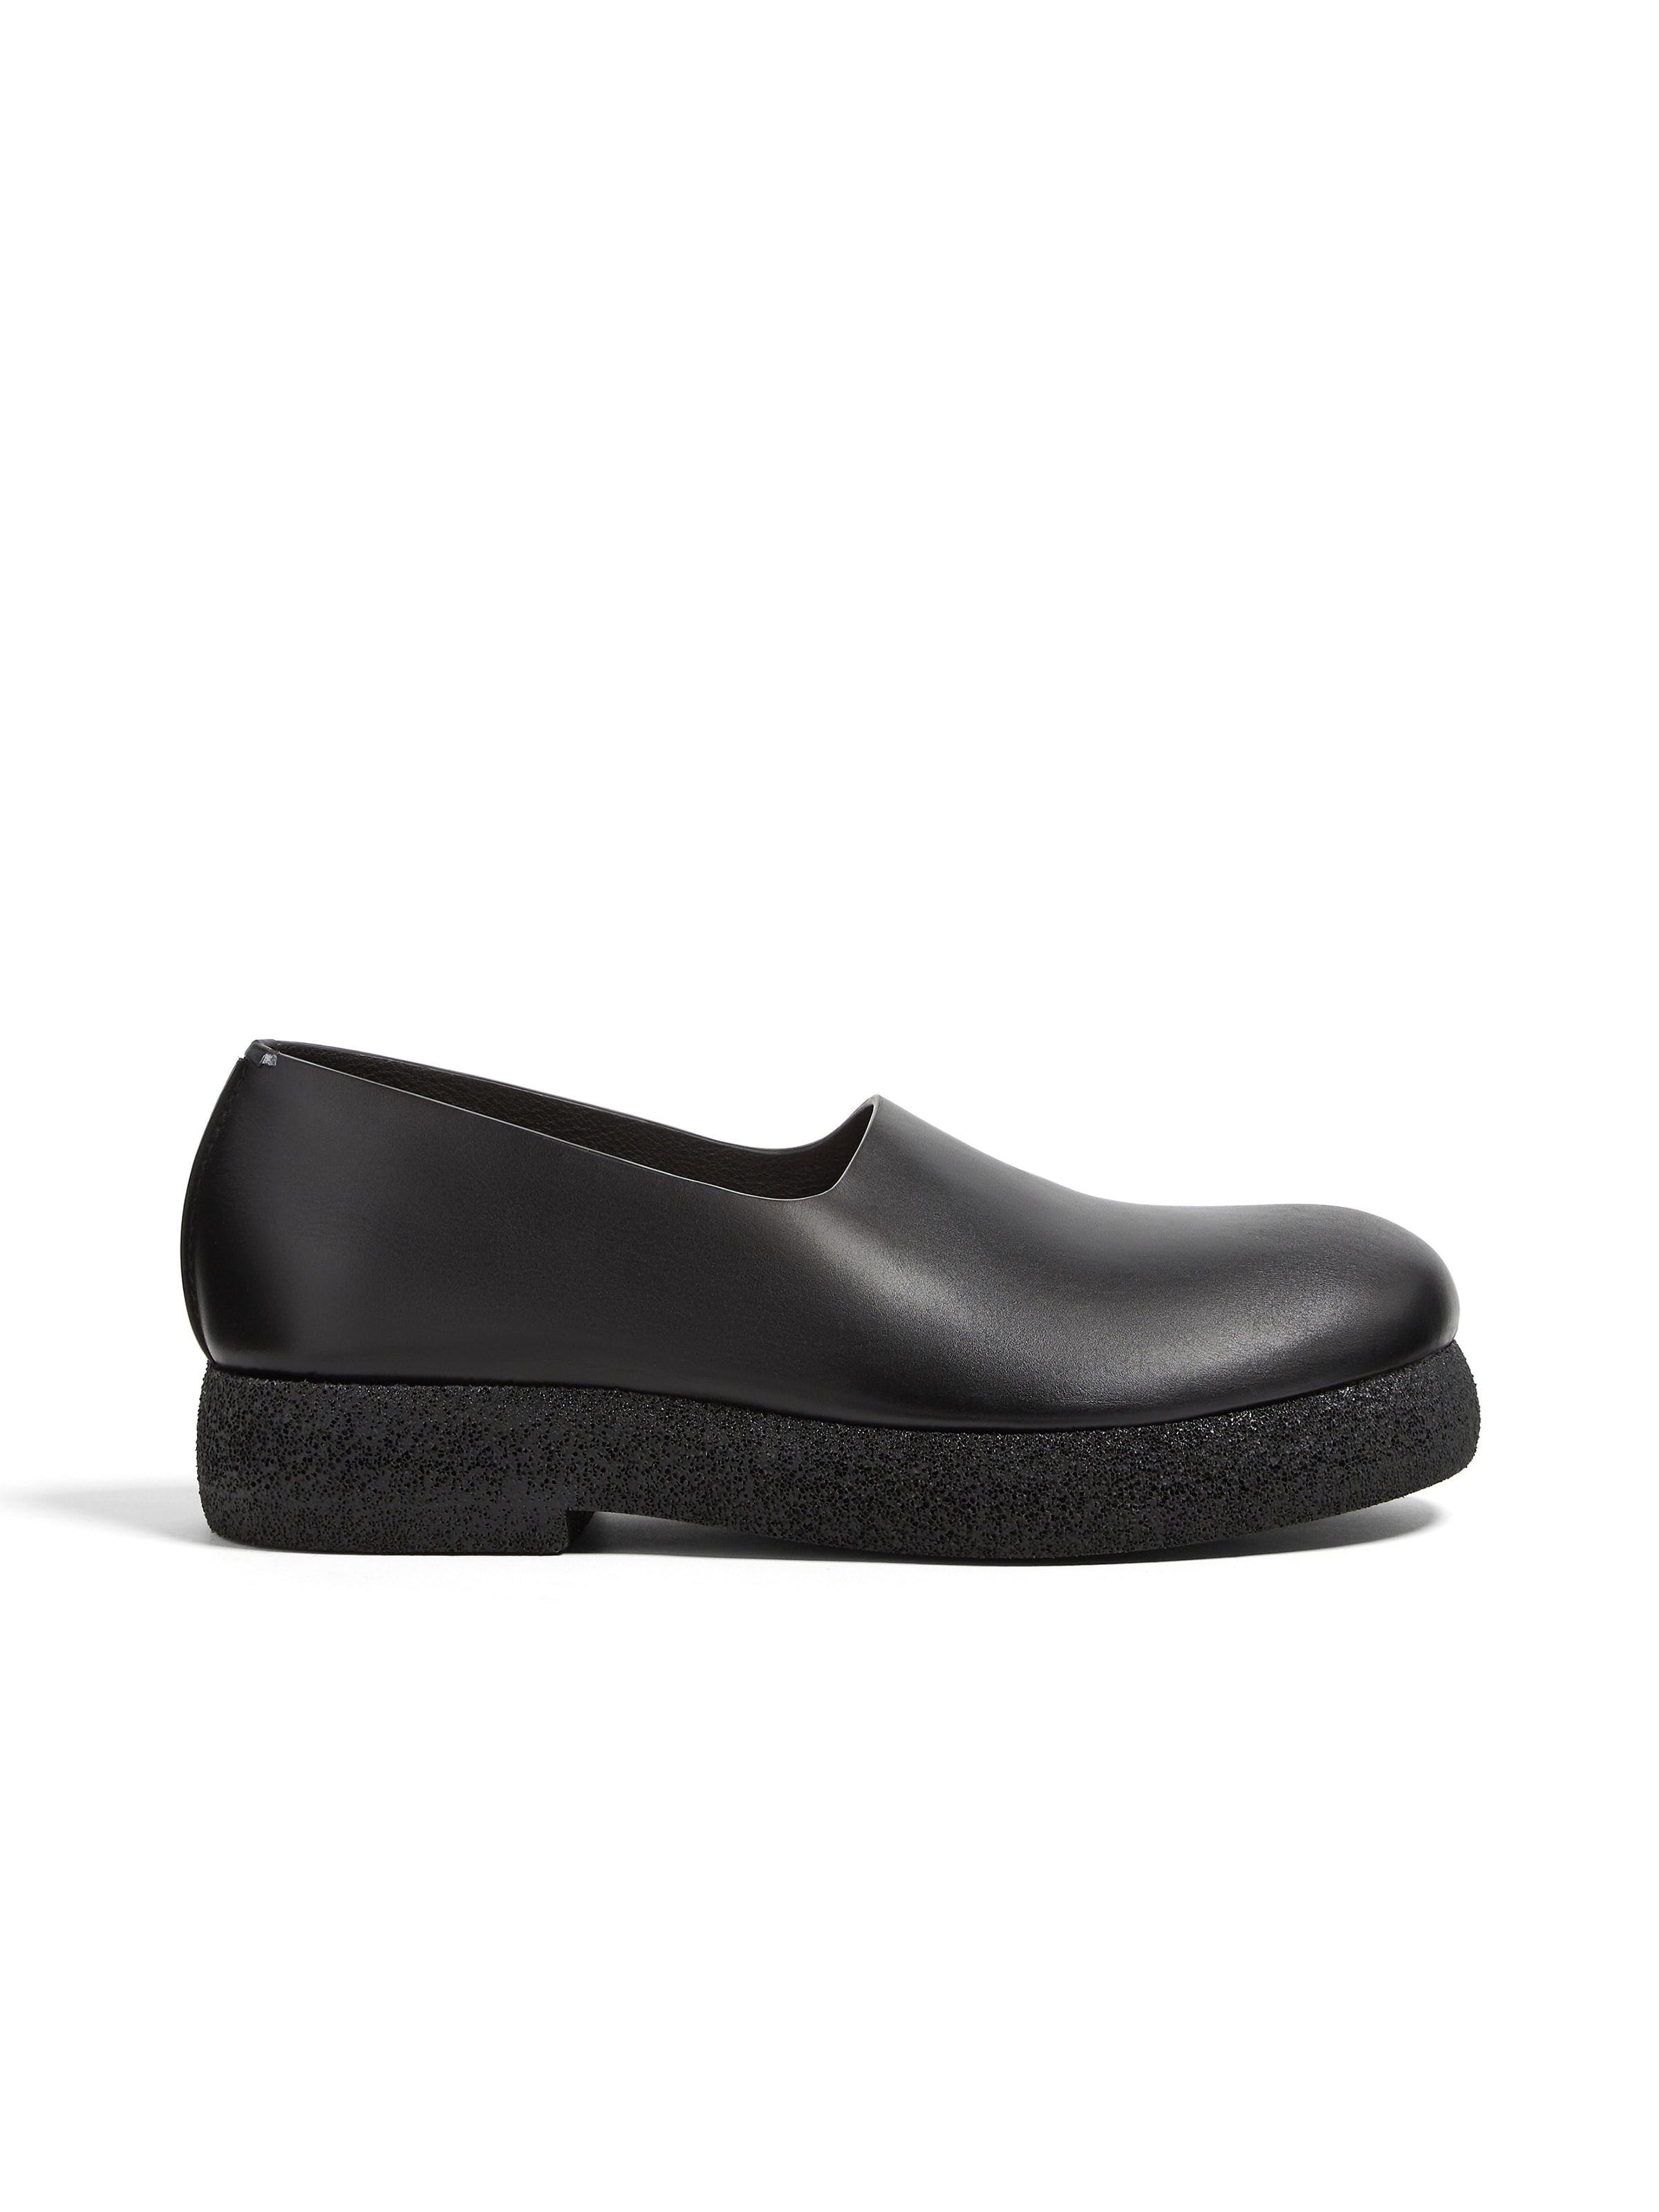 Zegna Black Leather Loafers